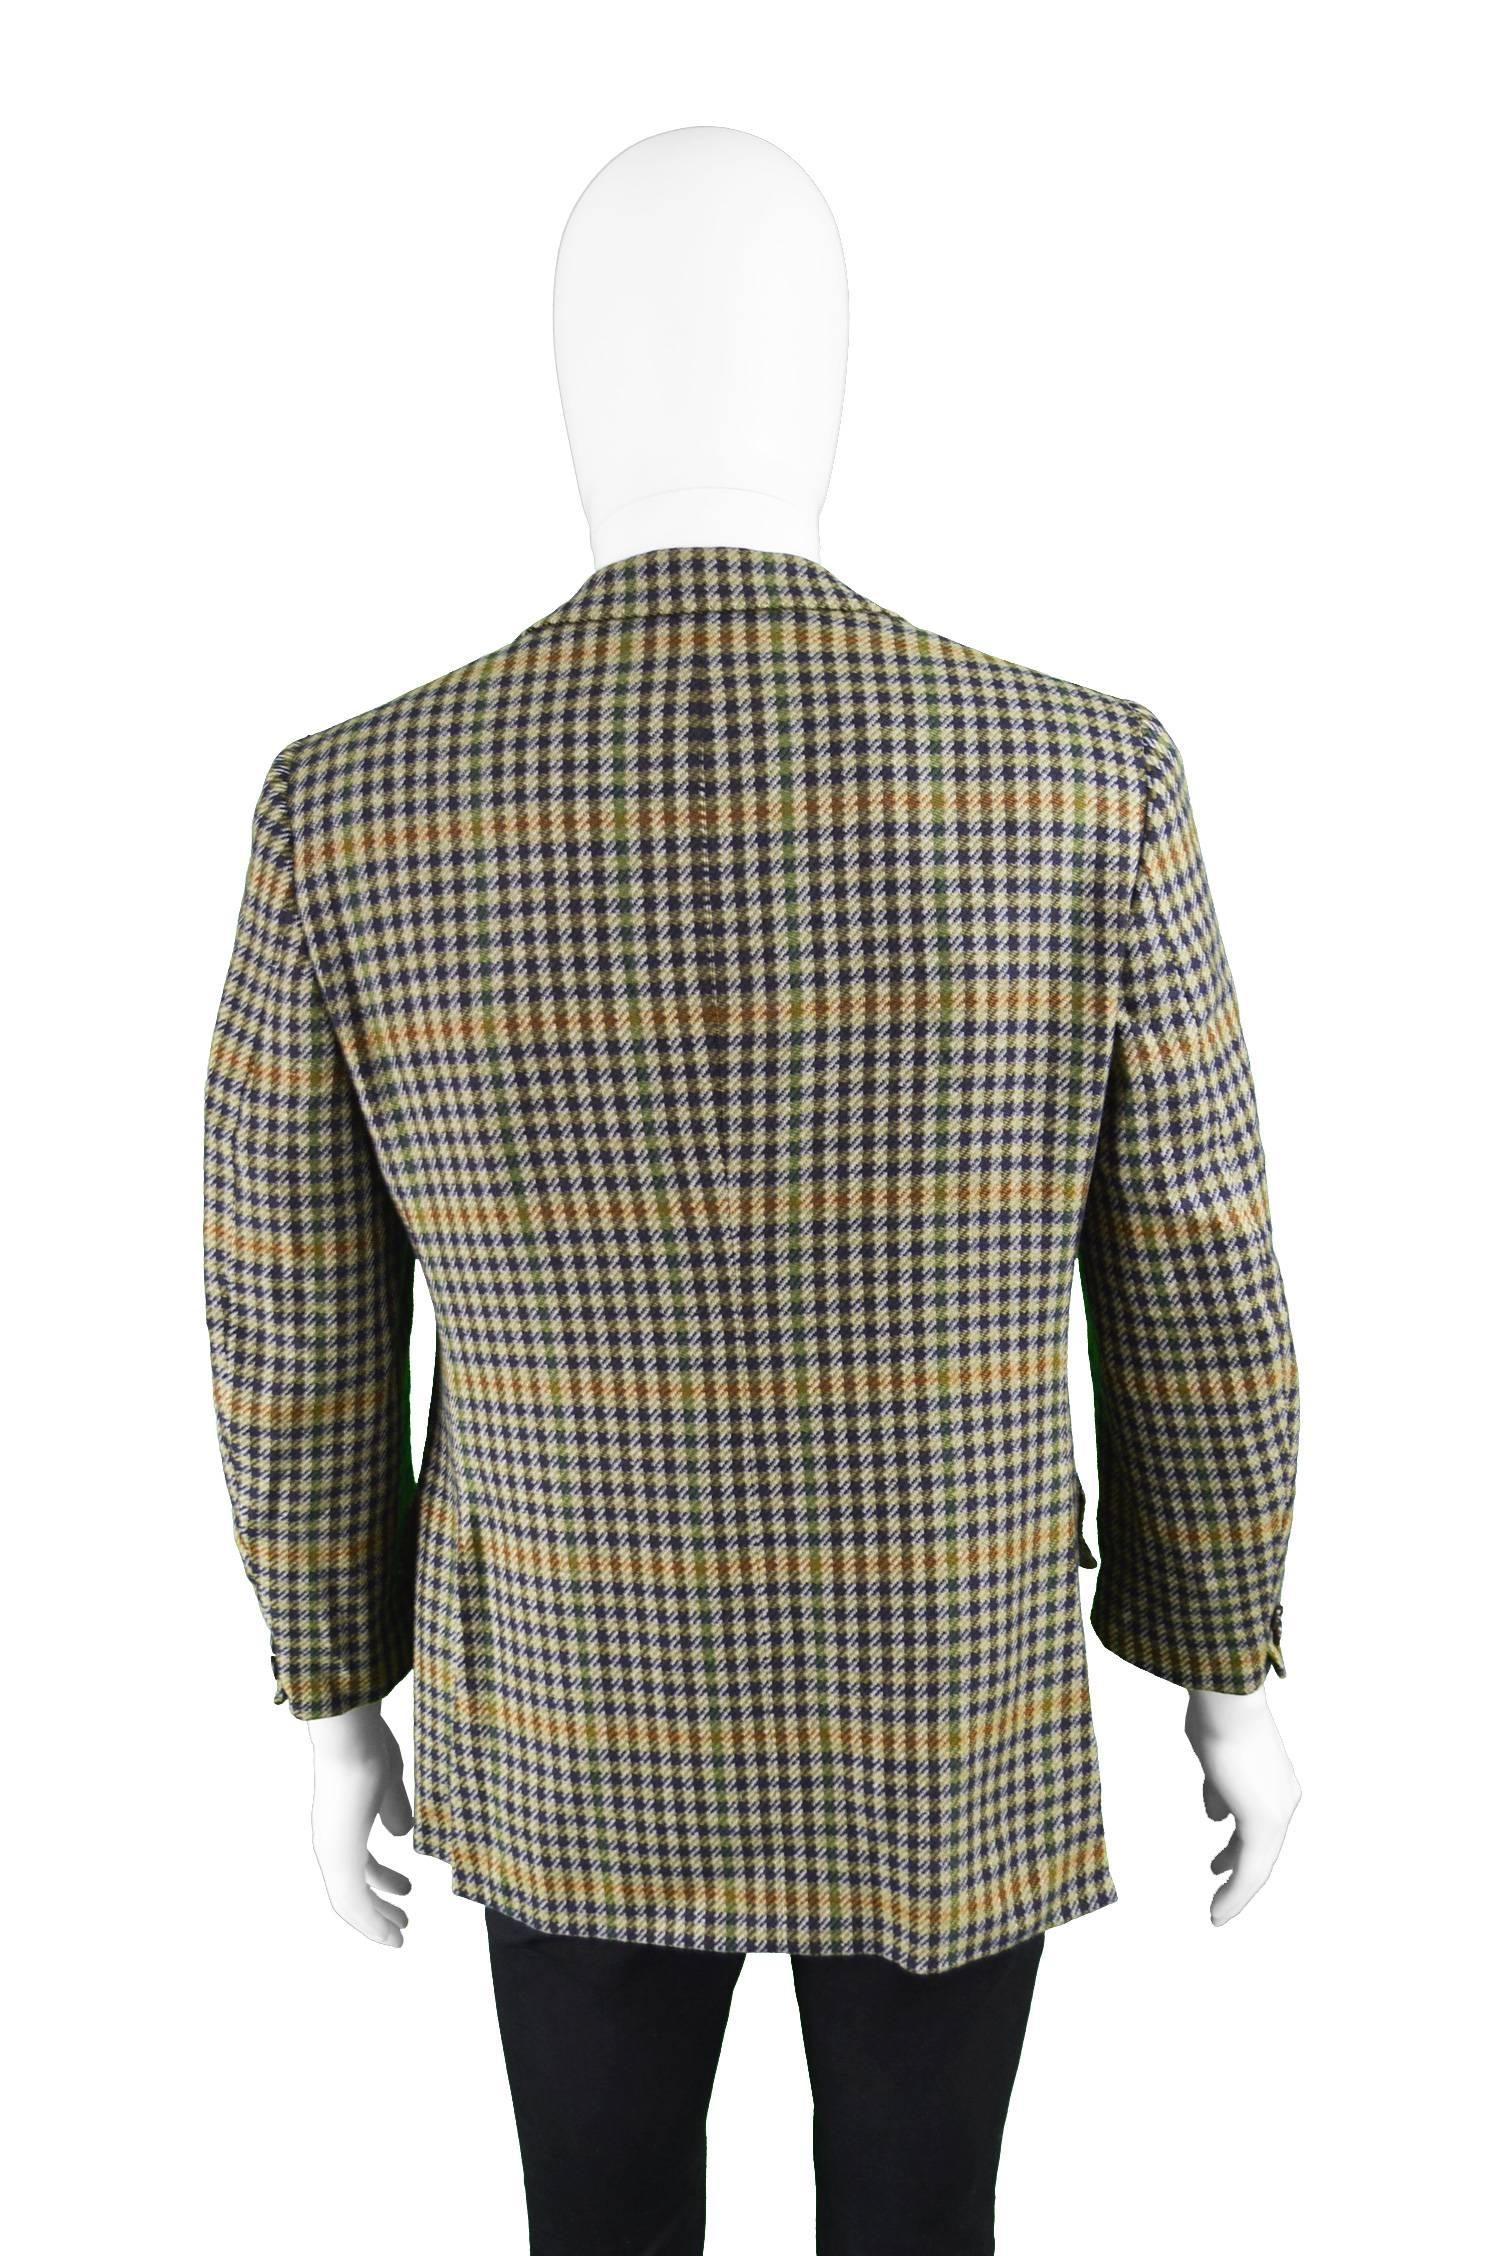 Chester Barrie for Harrods Men's Vintage Pure Cashmere Checked Jacket, 1970s For Sale 3